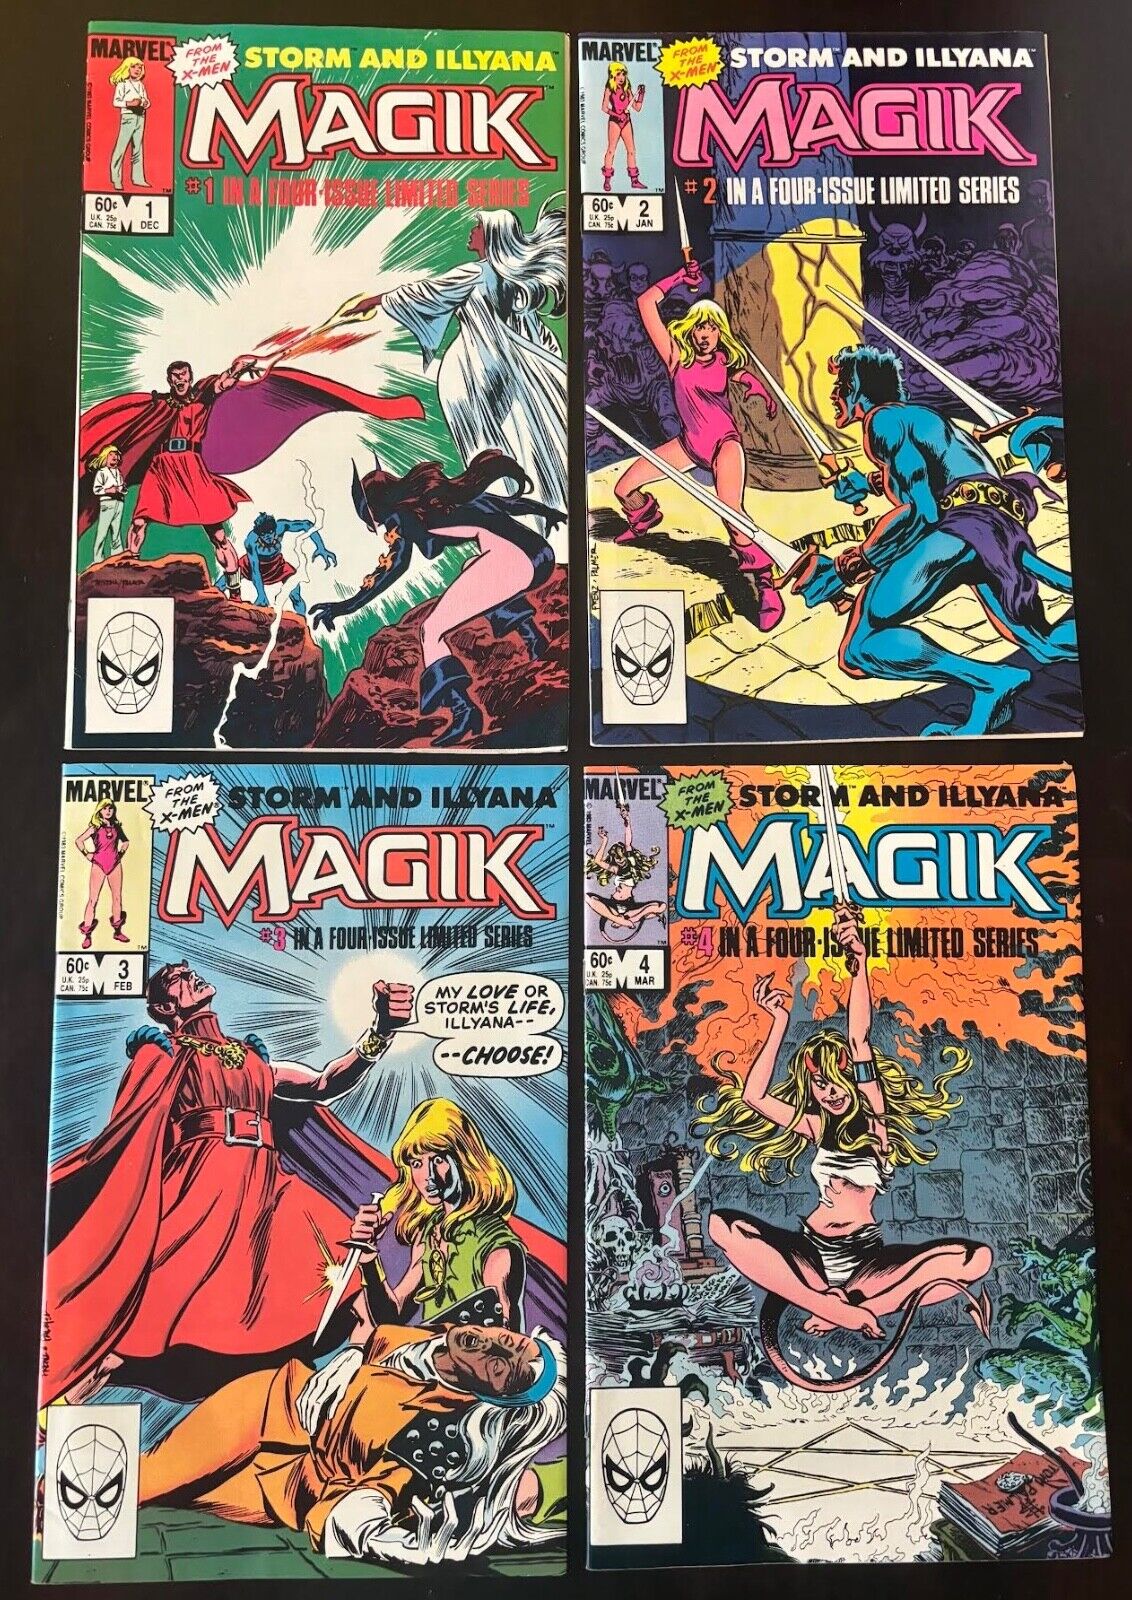 MAGIK (ILLYANA AND STORM LIMITED SERIES) #1 - 4 1983, Marvel VF